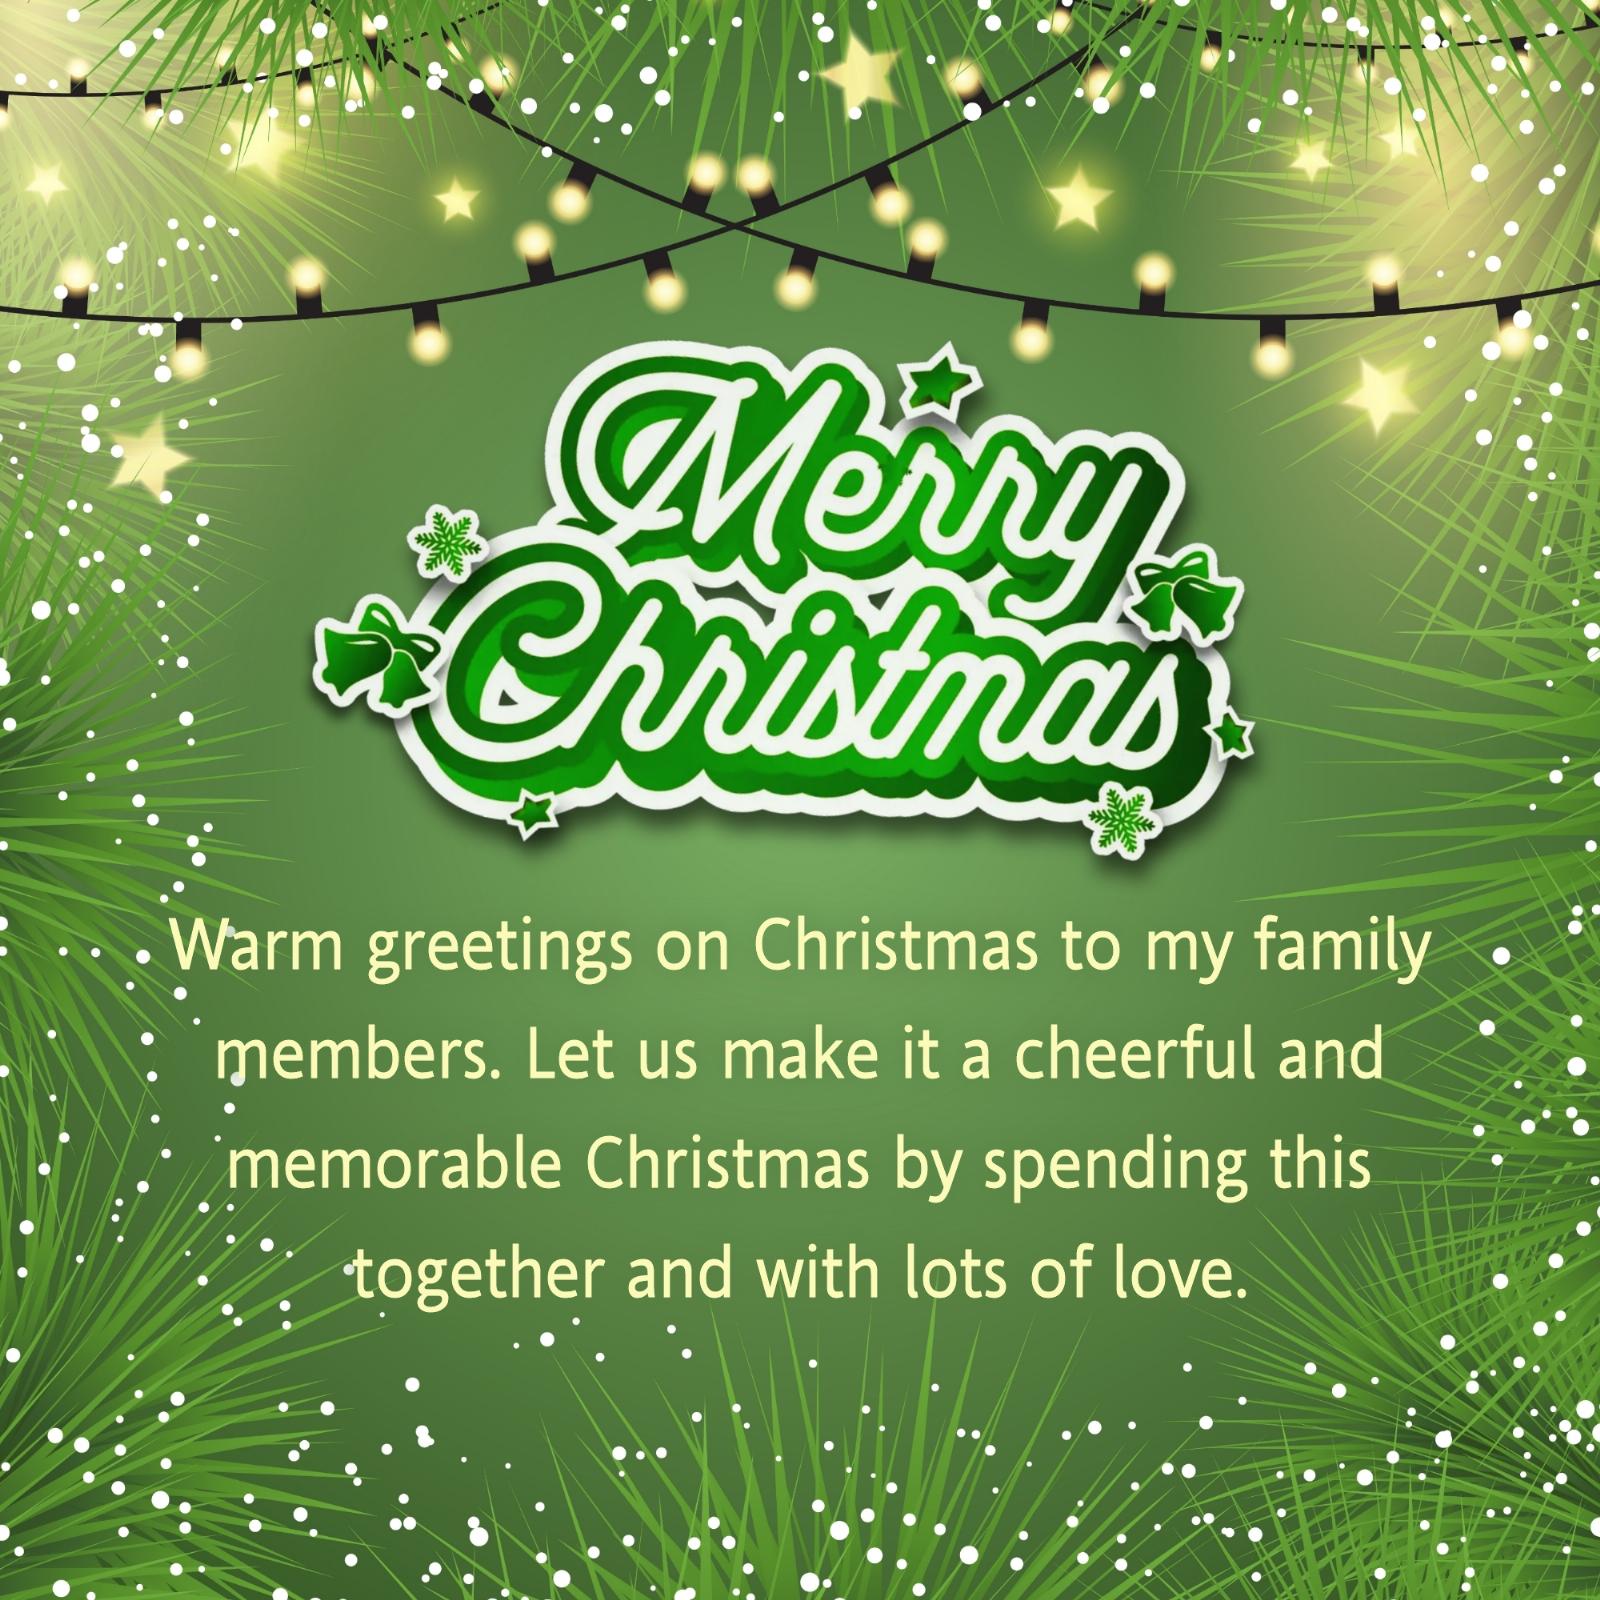 Warm greetings on Christmas to my family members